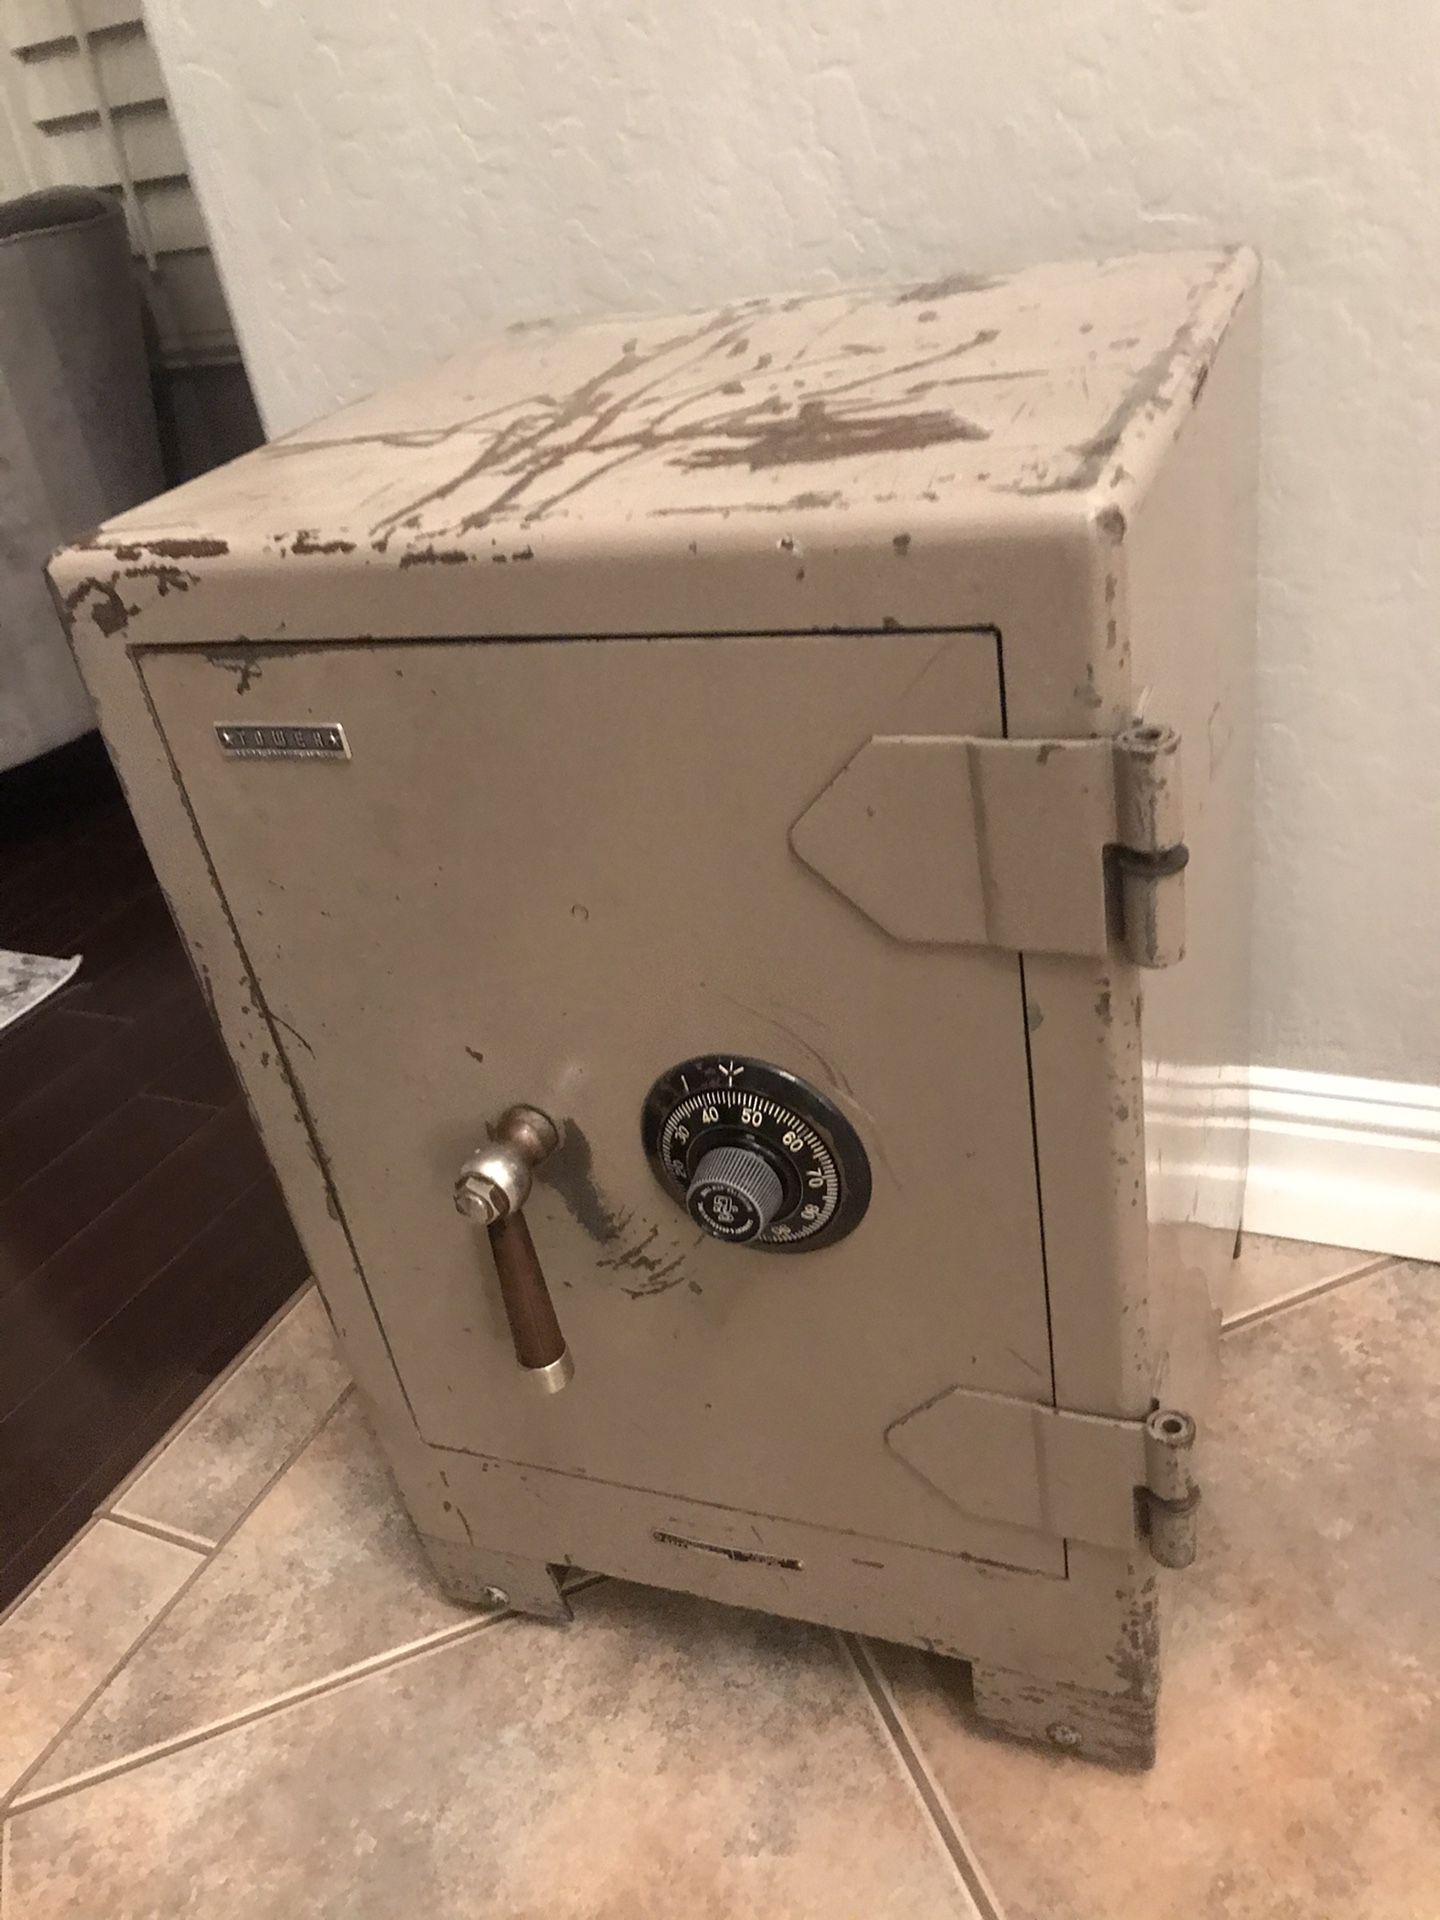 Tower Sears Roebuck and Co Vintage safe 16” x 16” x 25” height for decoration